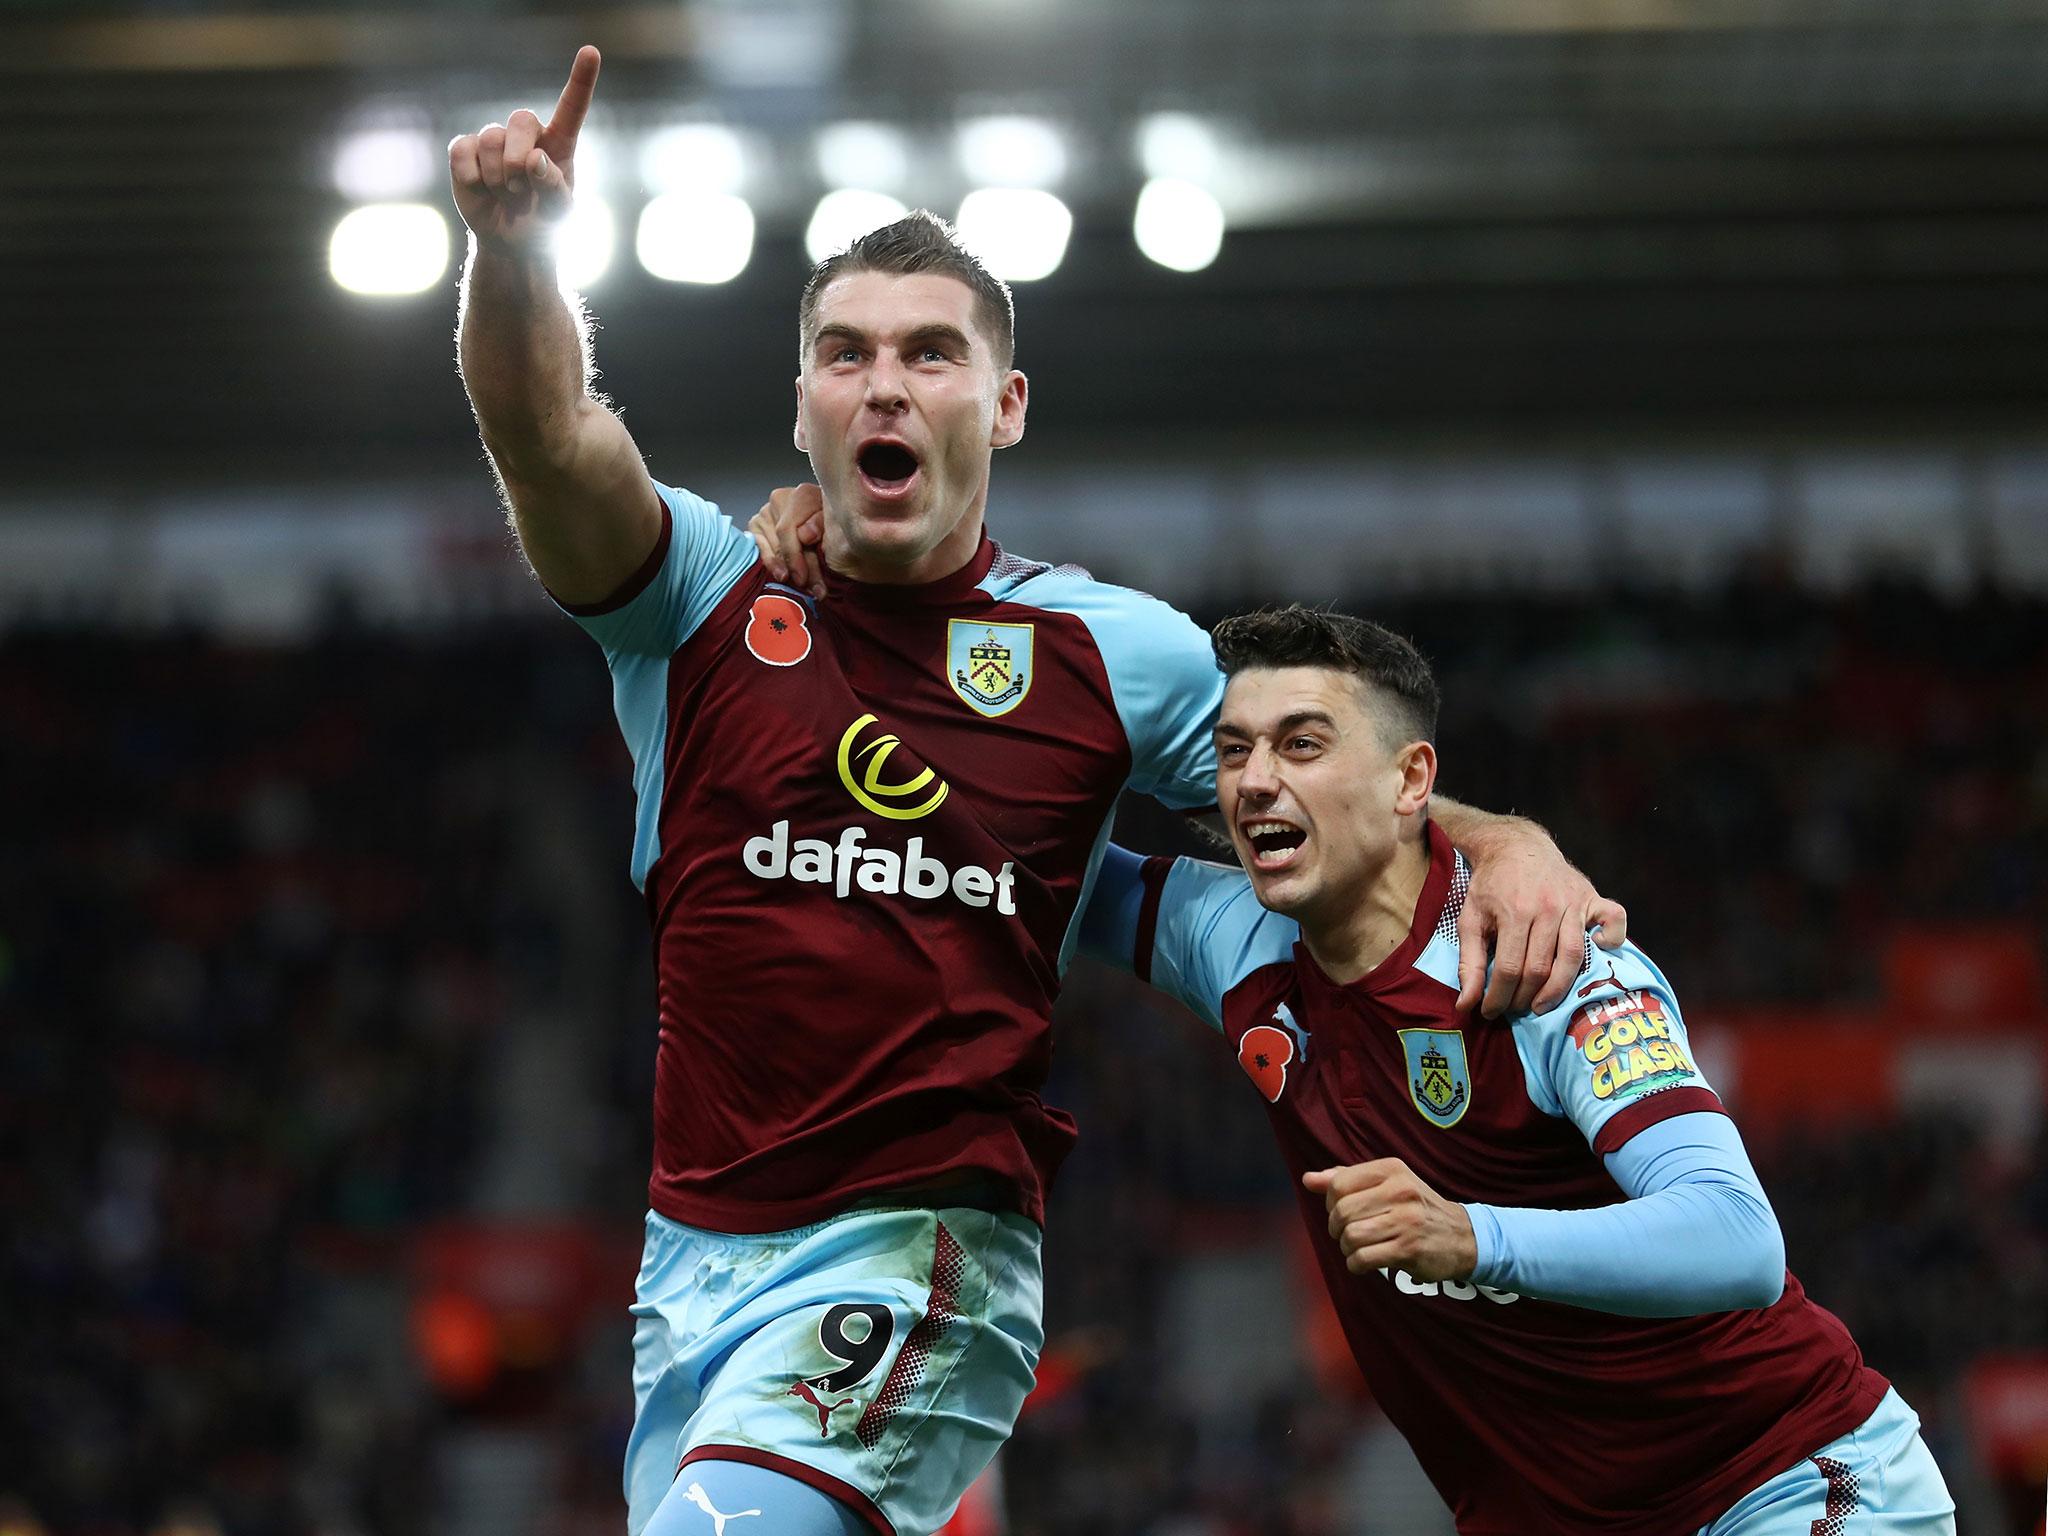 Sam Vokes struck late to give the high-flying Clarets another win